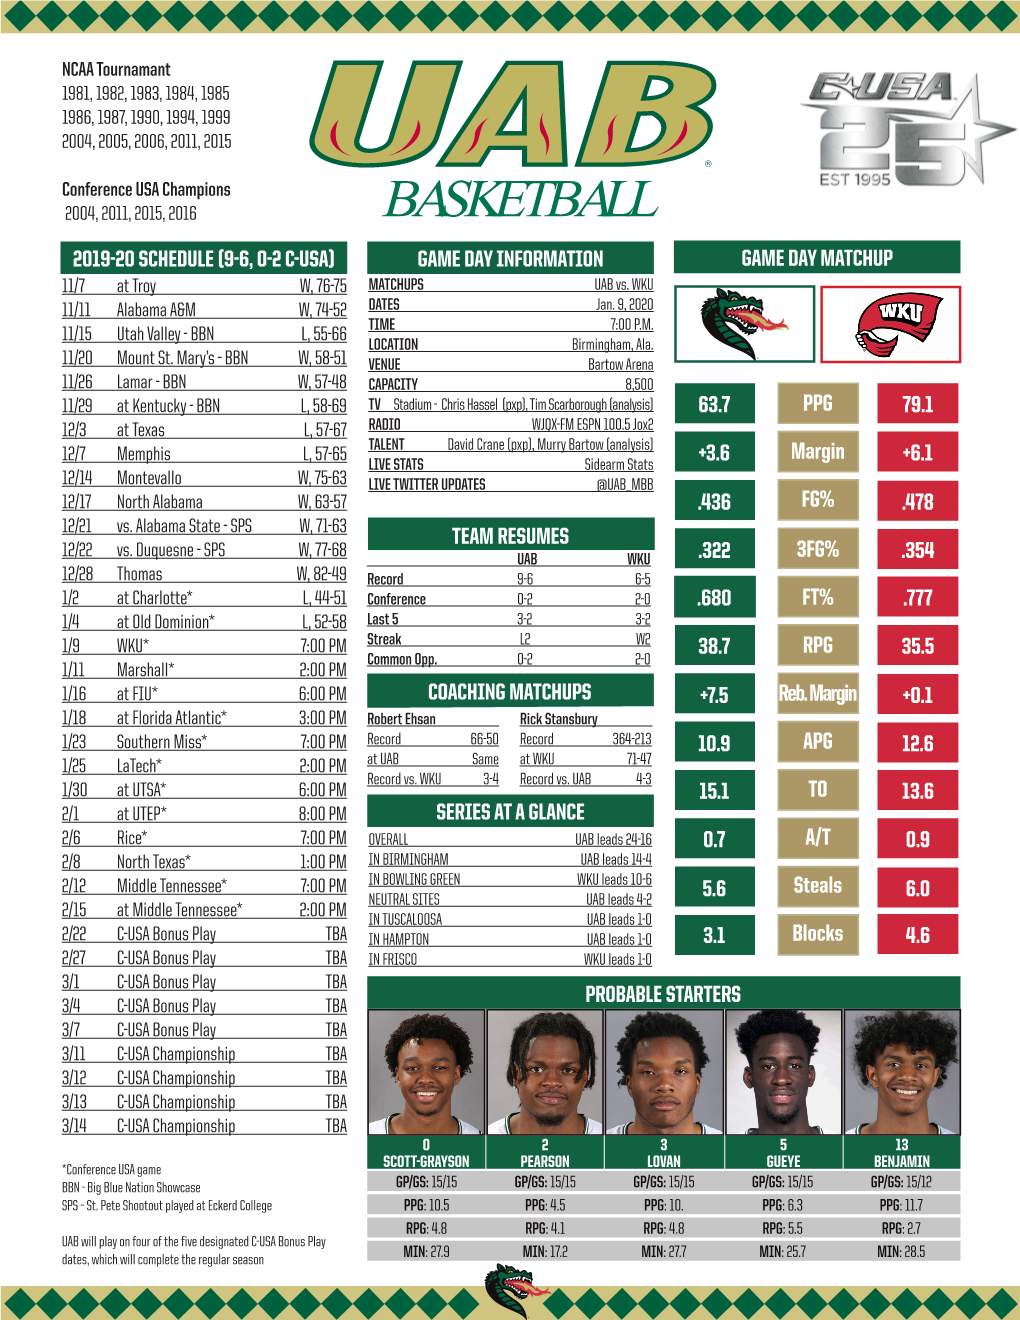 BASKETBALL 2019-20 SCHEDULE (9-6, 0-2 C-USA) GAME DAY INFORMATION GAME DAY MATCHUP 11/7 at Troy W, 76-75 MATCHUPS UAB Vs